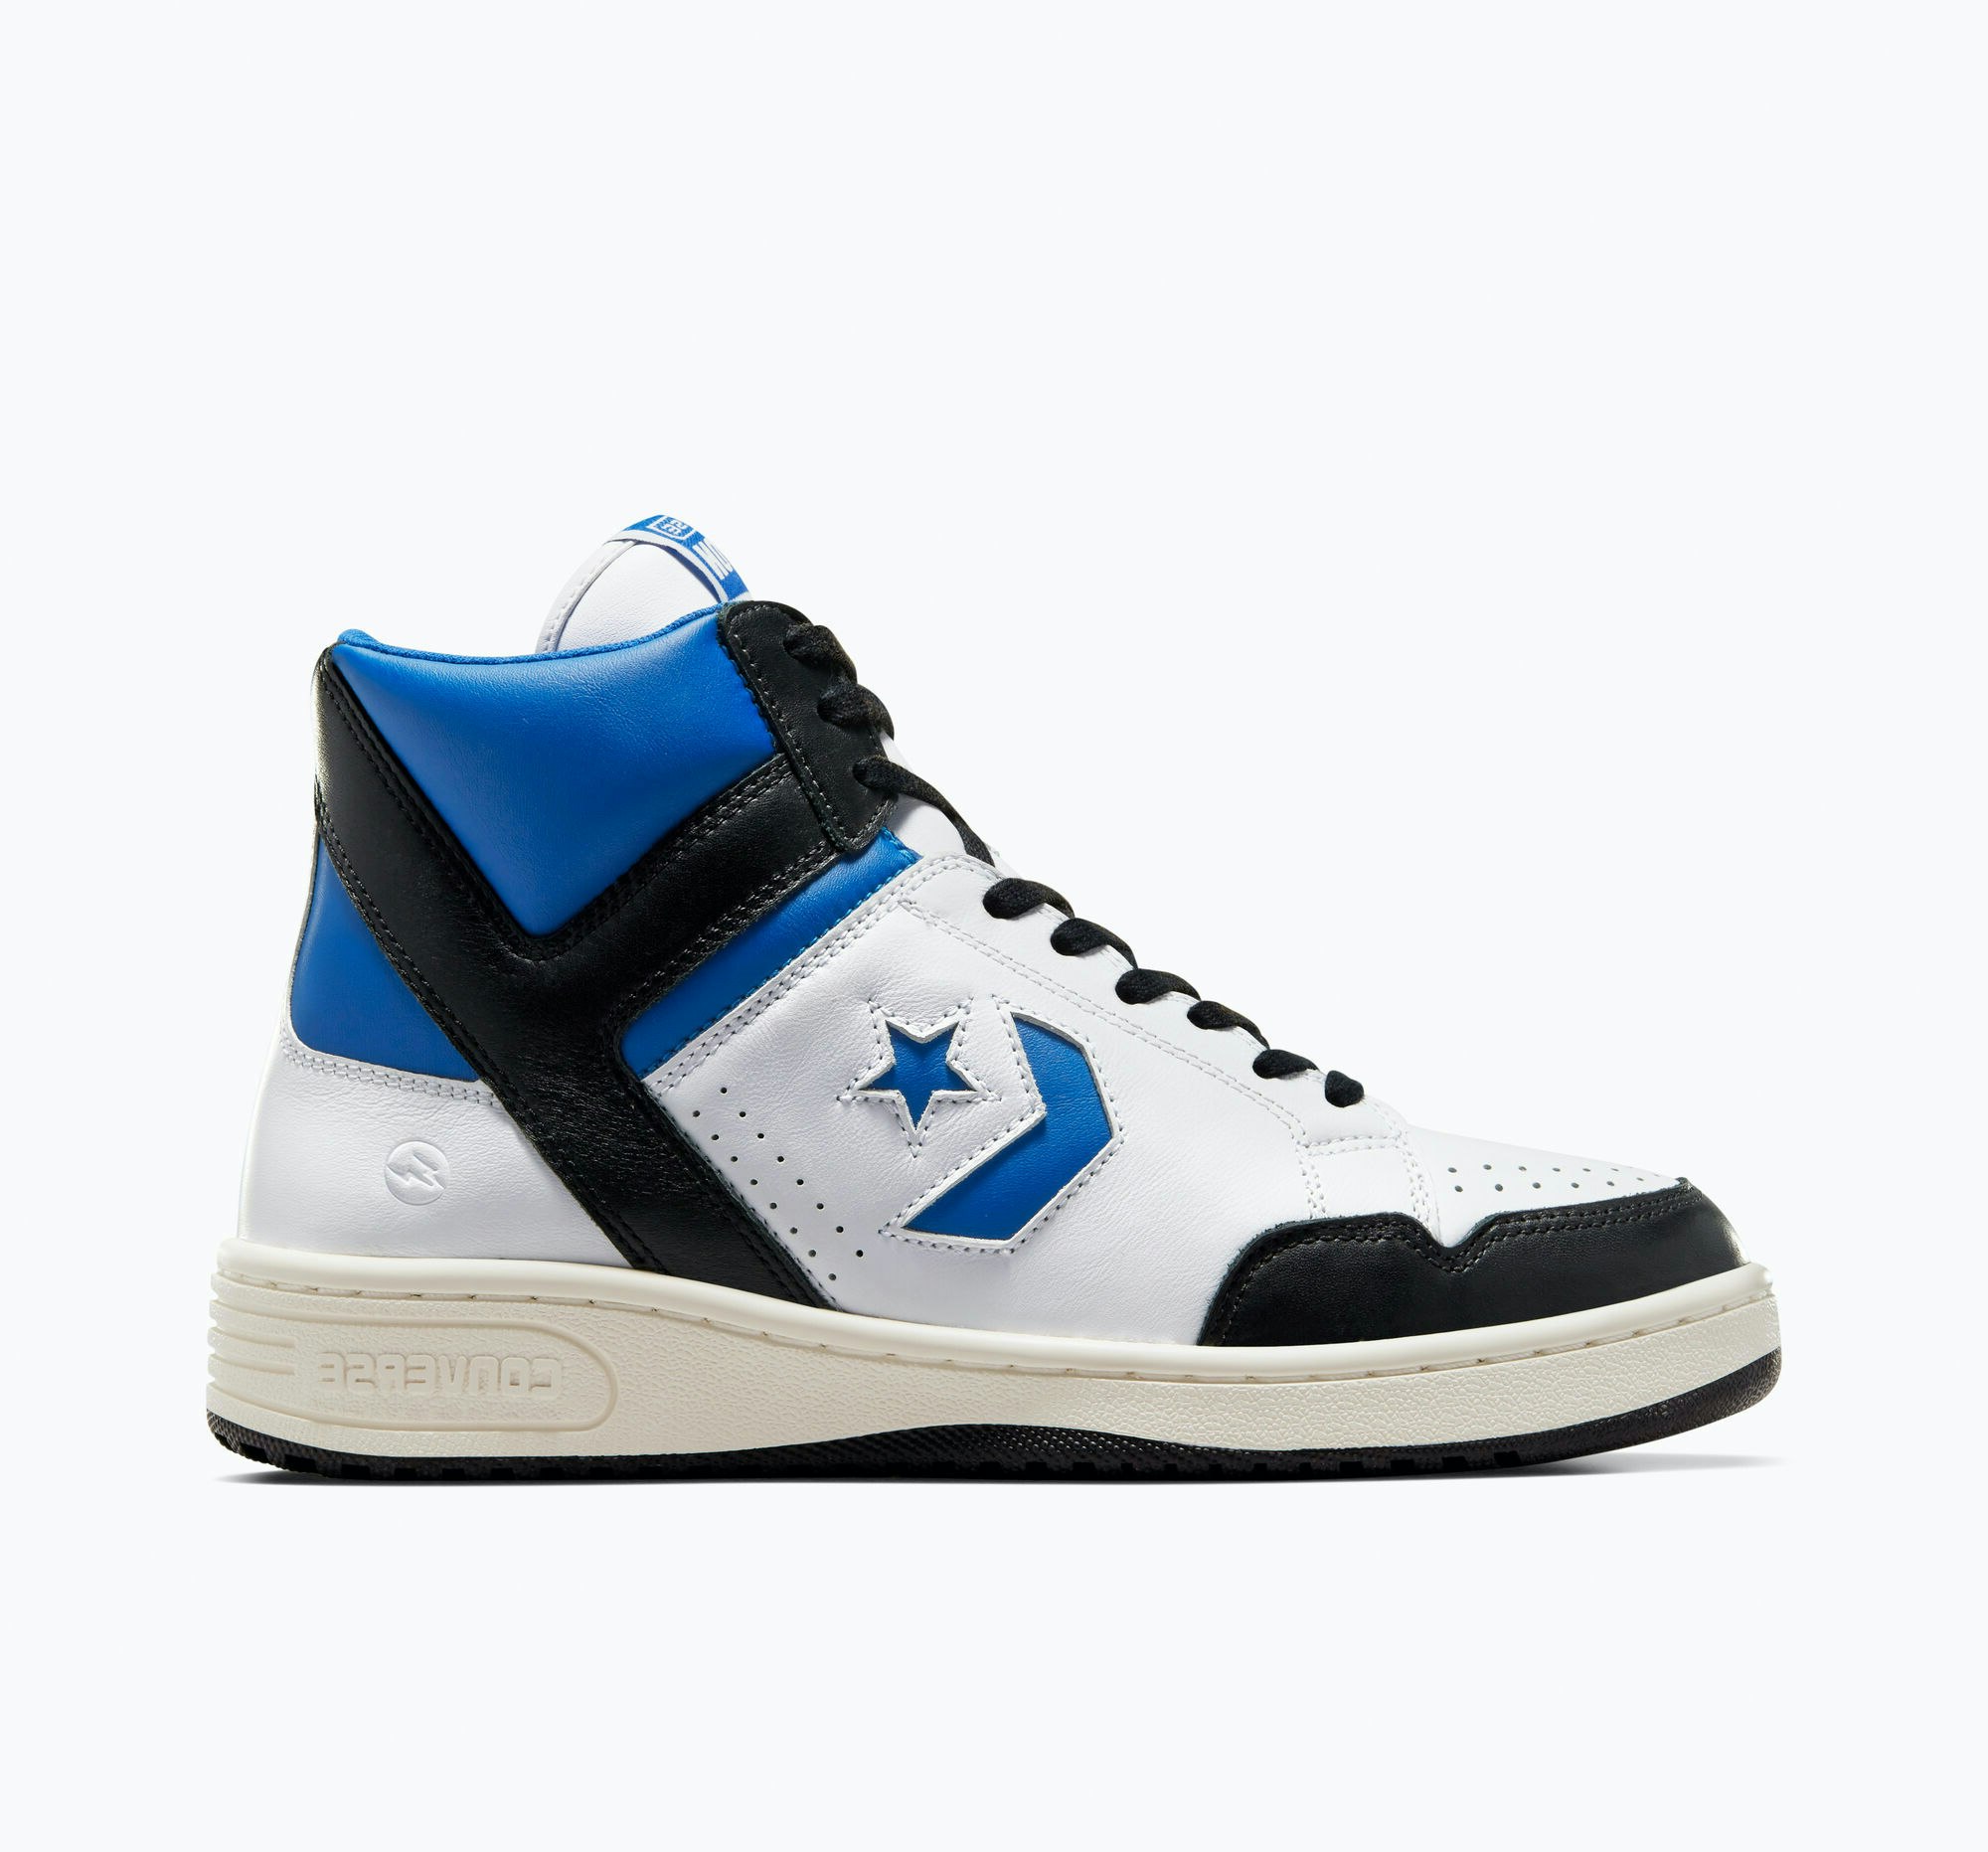 Fragment x Converse Weapon Mid "Sport Royal"